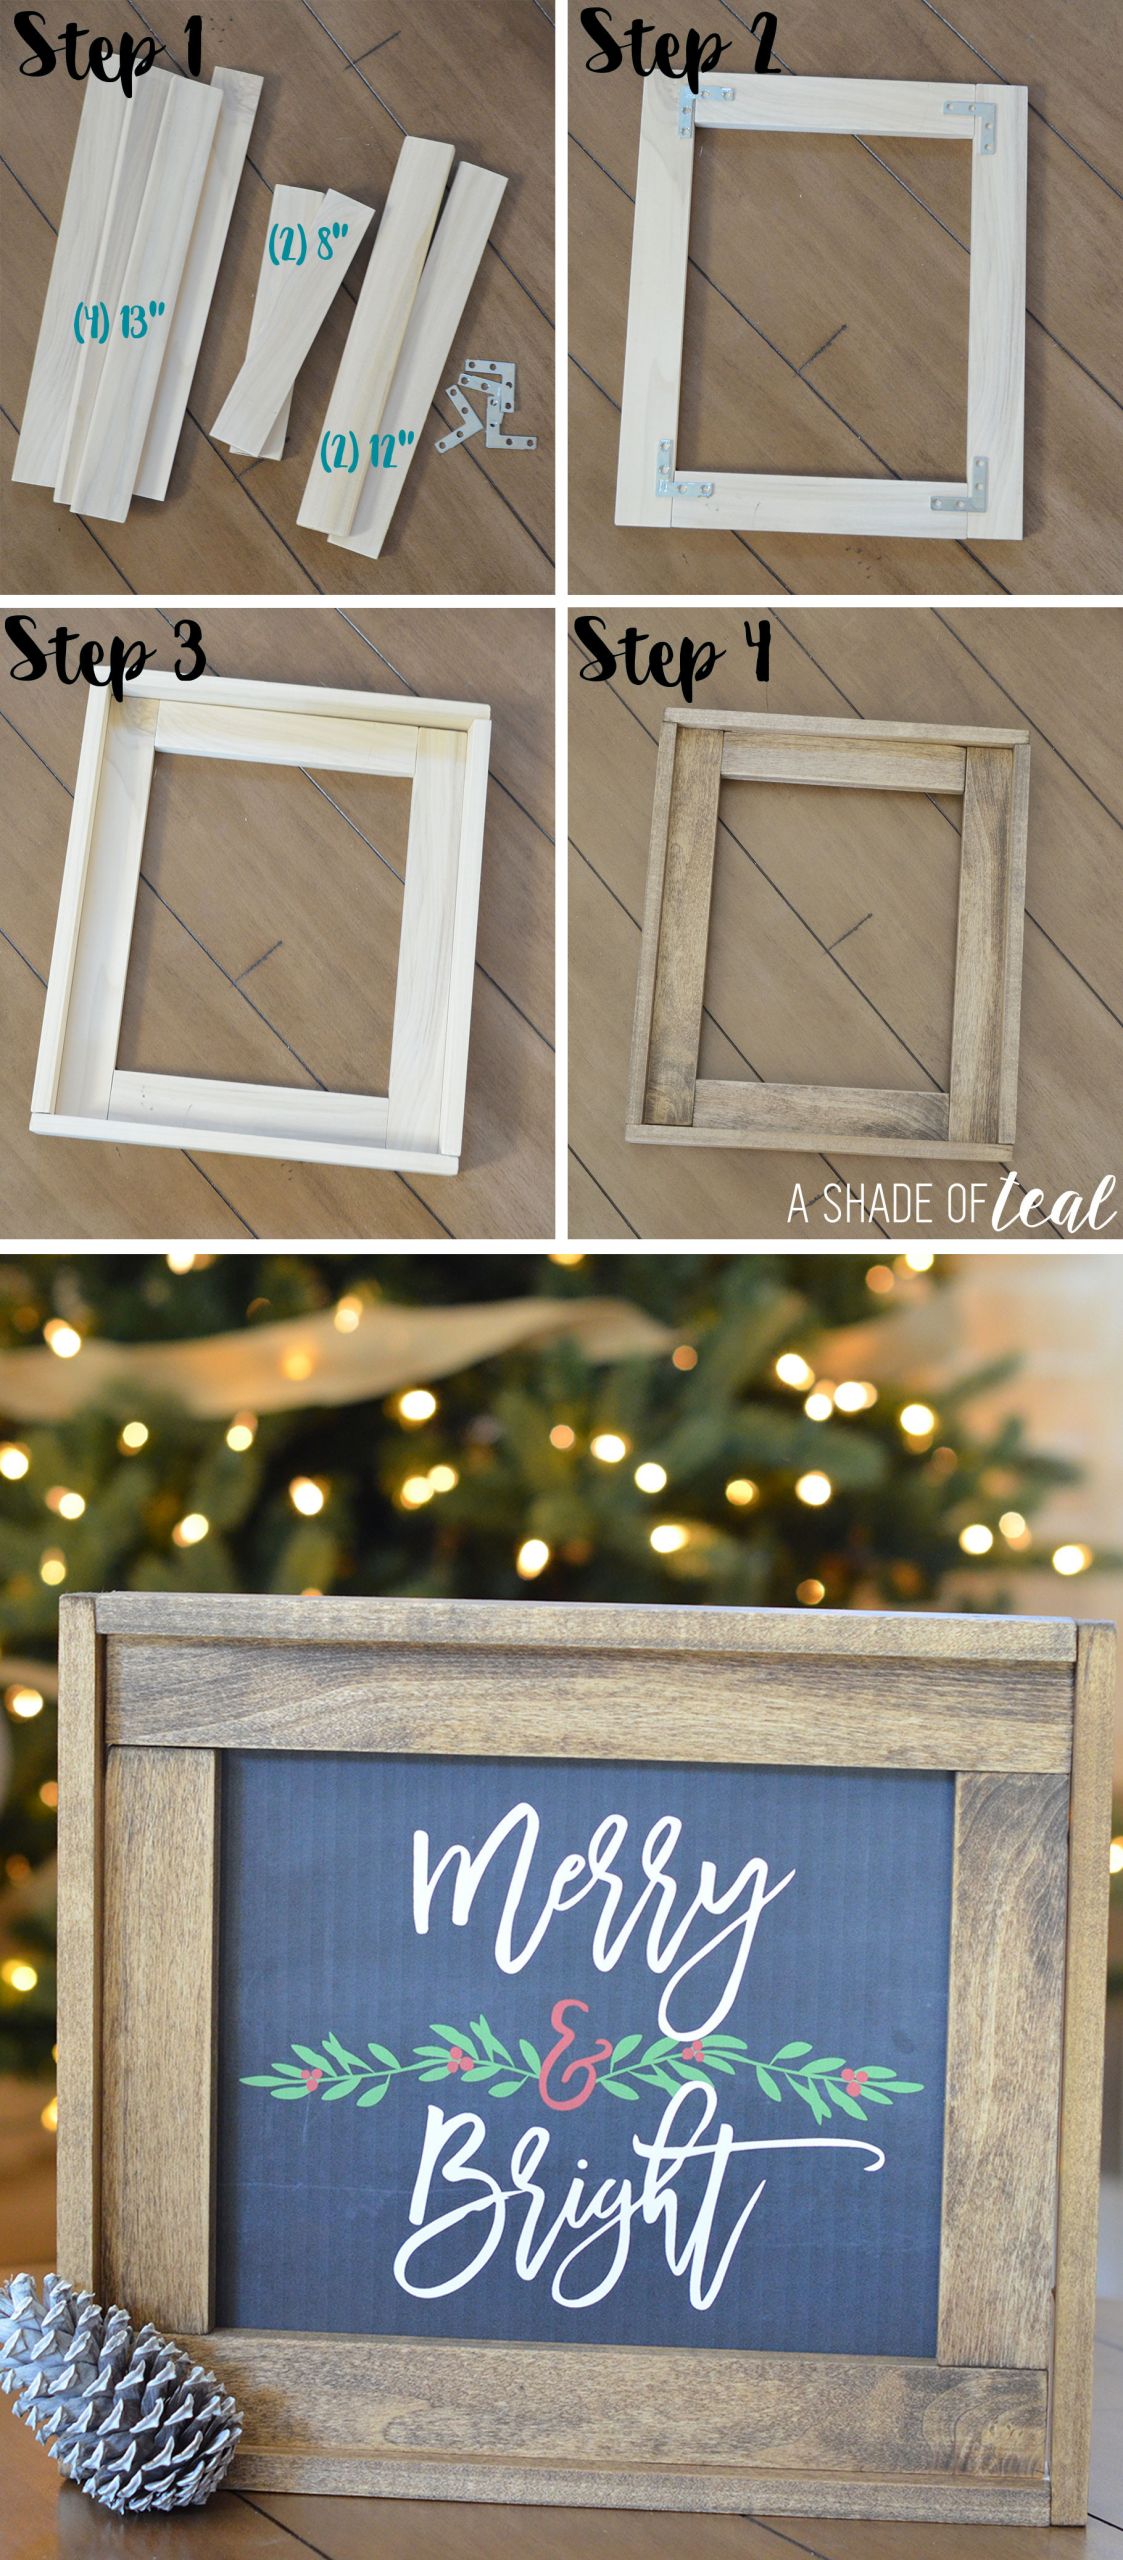 DIY Wood Frame
 Christmas Mantle Update How to make a Rustic Wood Frame